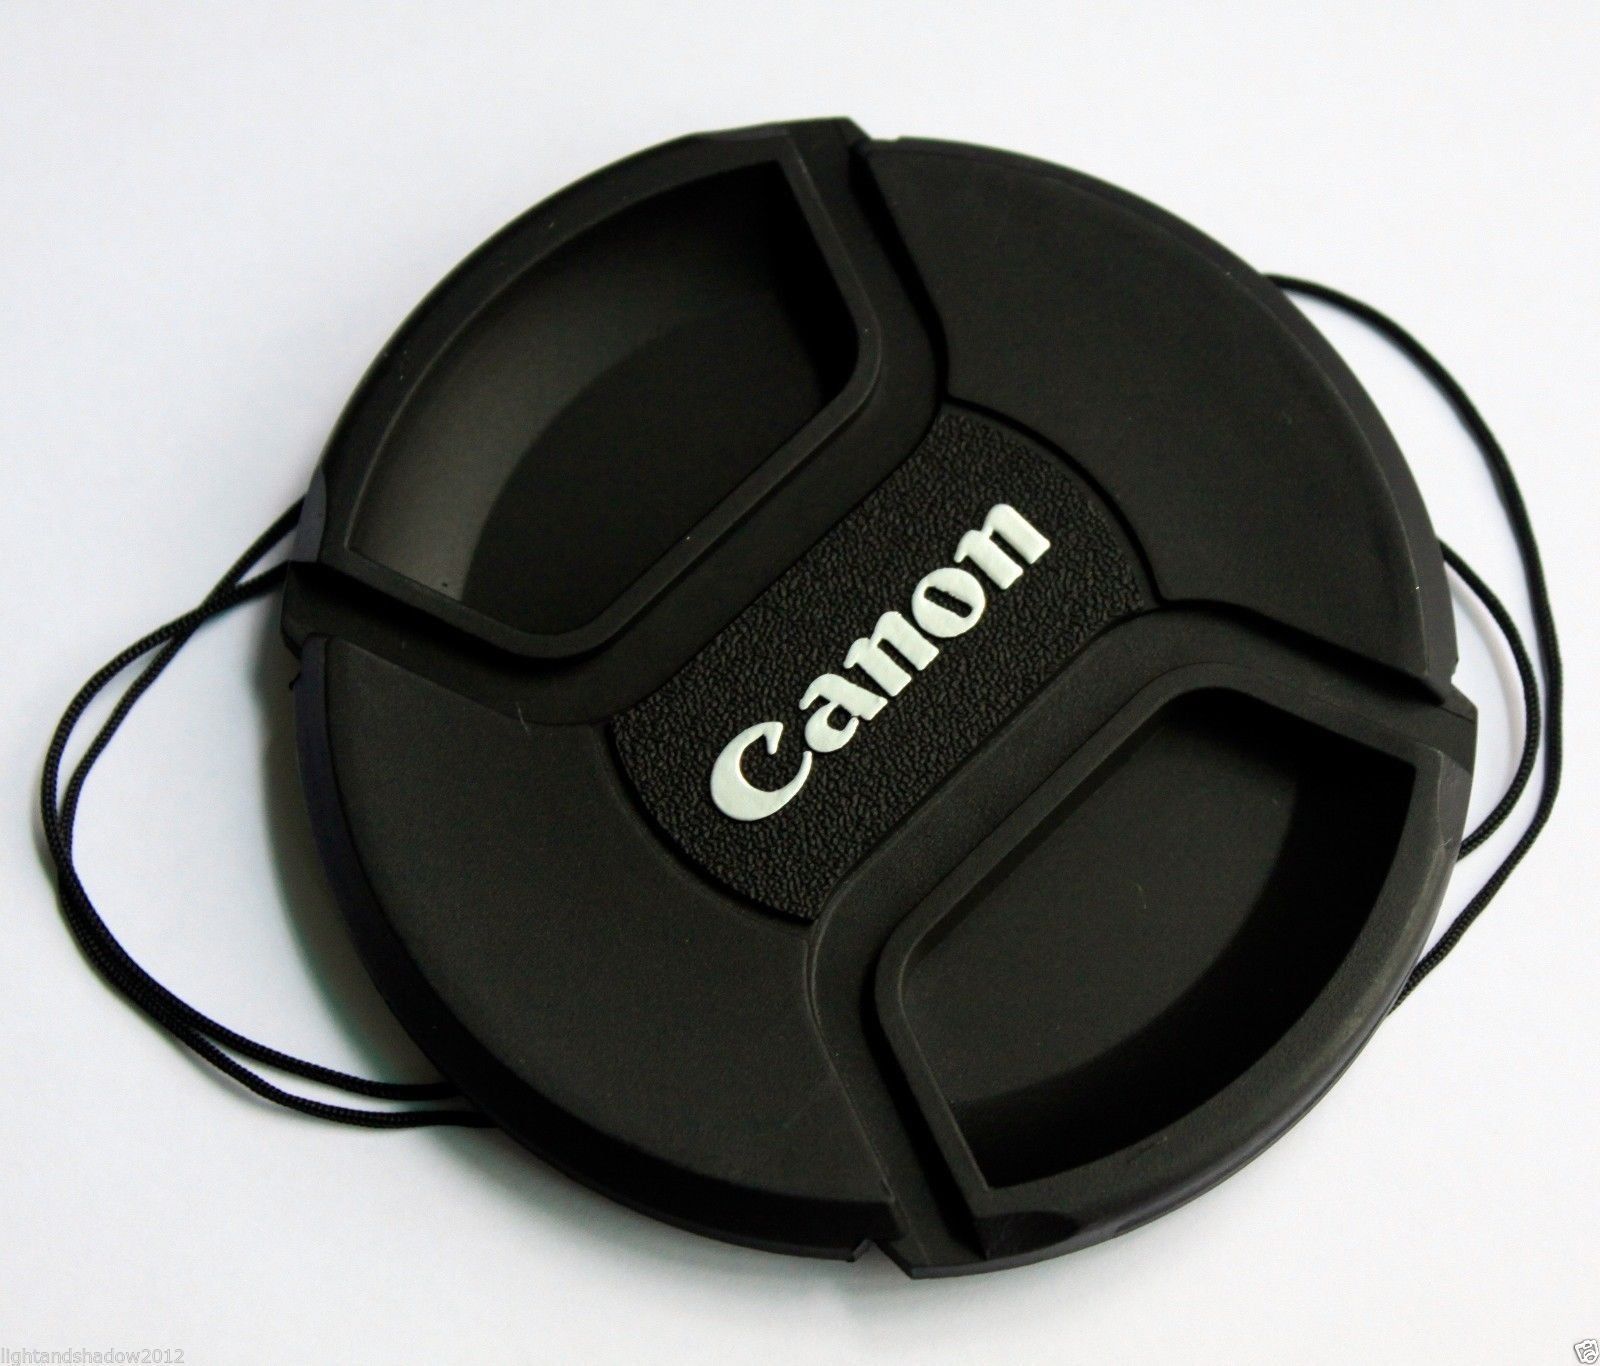 58mm 58 mm Snapon Front Lens Cap Cover w Cord strap for